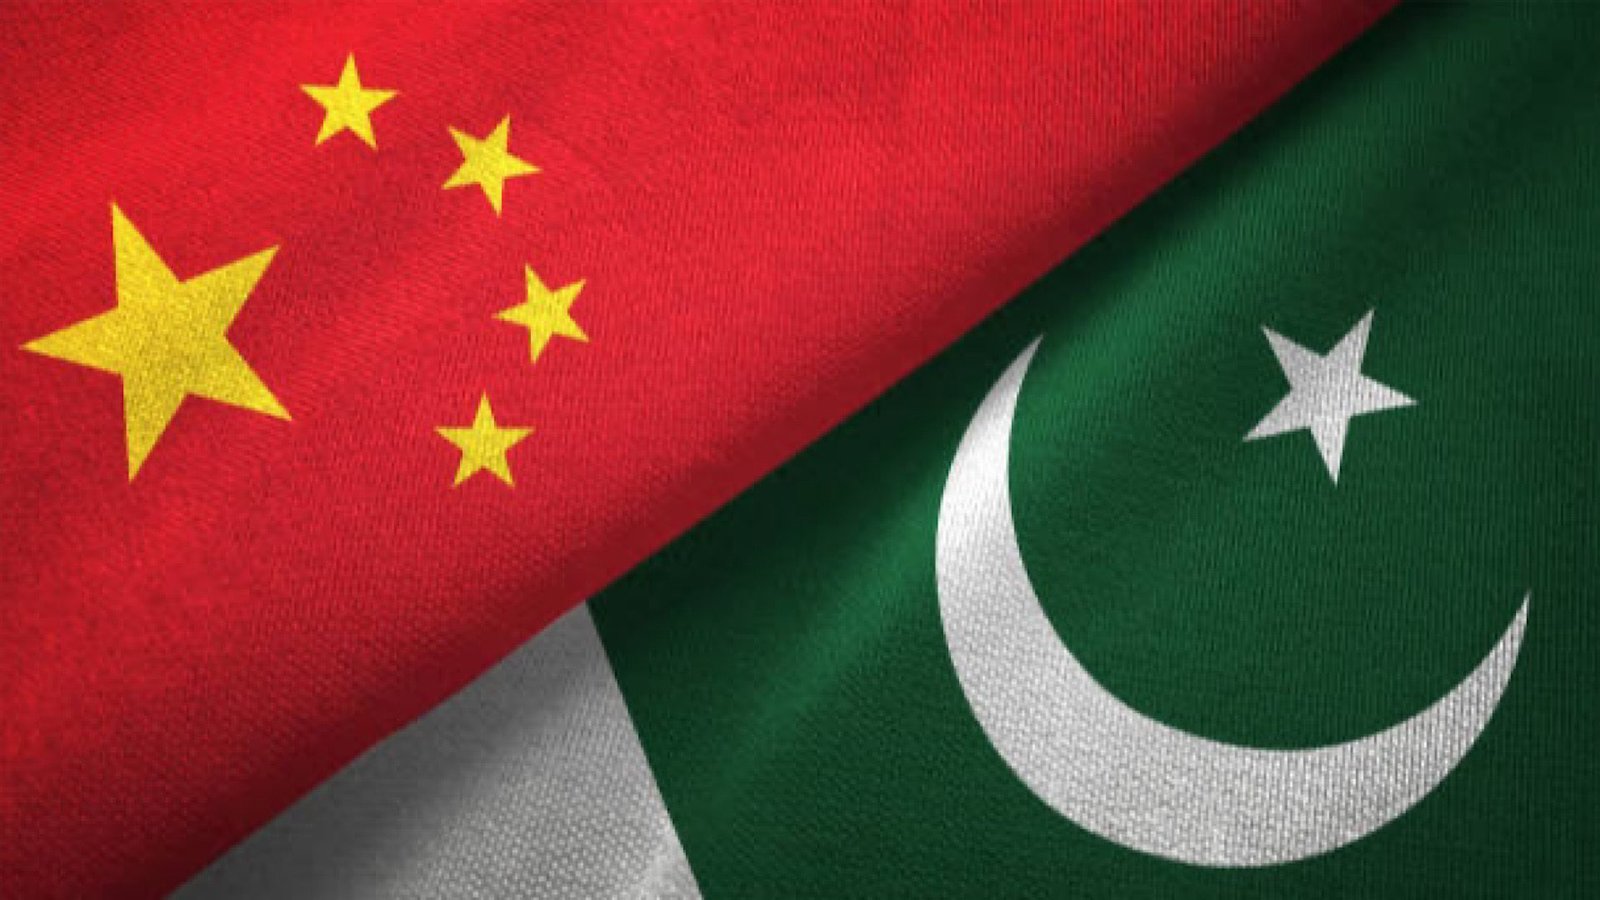 Pakistan and China to sign MoU on petrochemical refinery next month